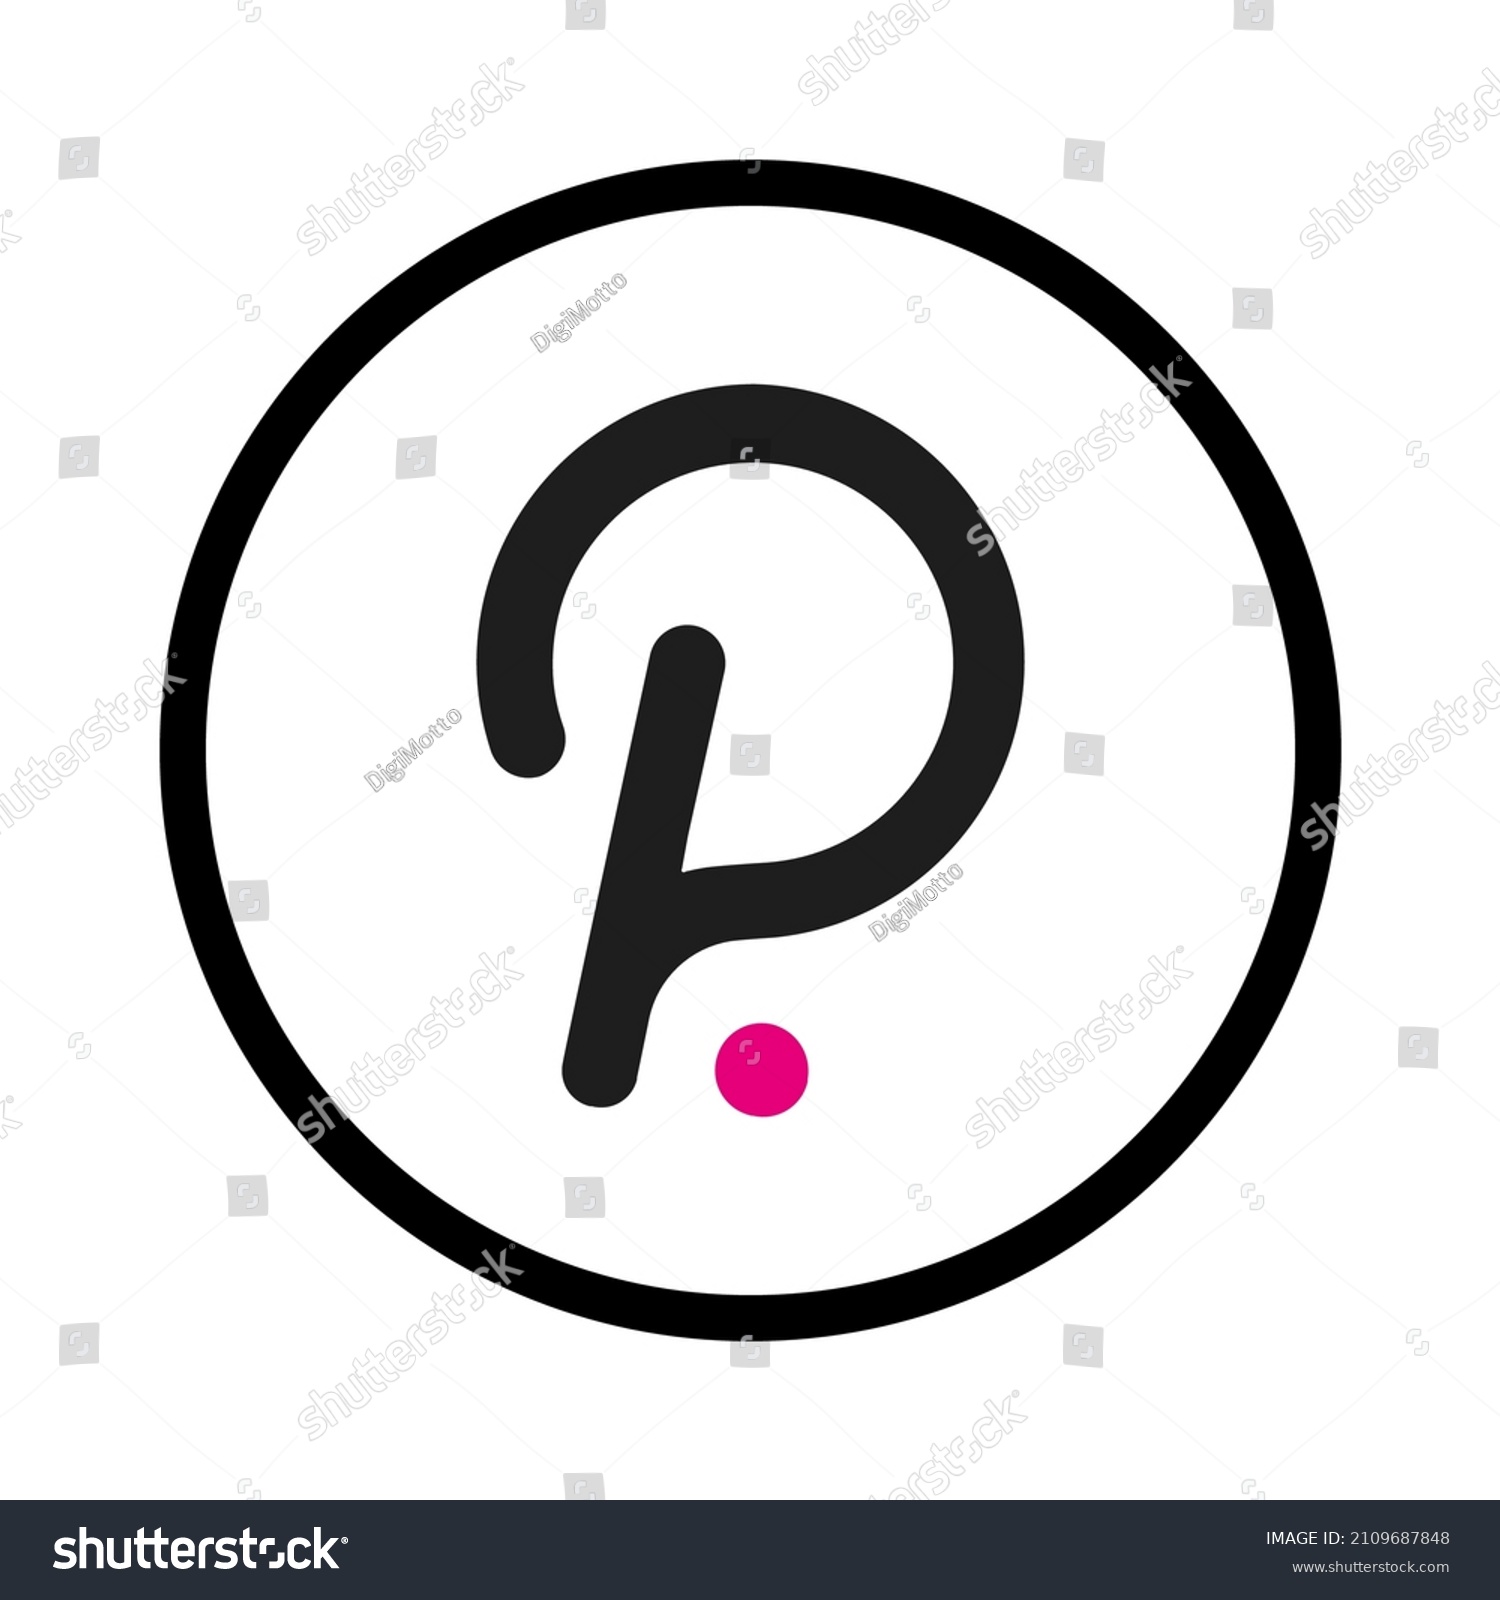 SVG of Polkadot Coin Icon DOT Cryptocurrency logo vector illustration. Best used for T-shirts, mugs, posters, banners, social media and trading websites. svg